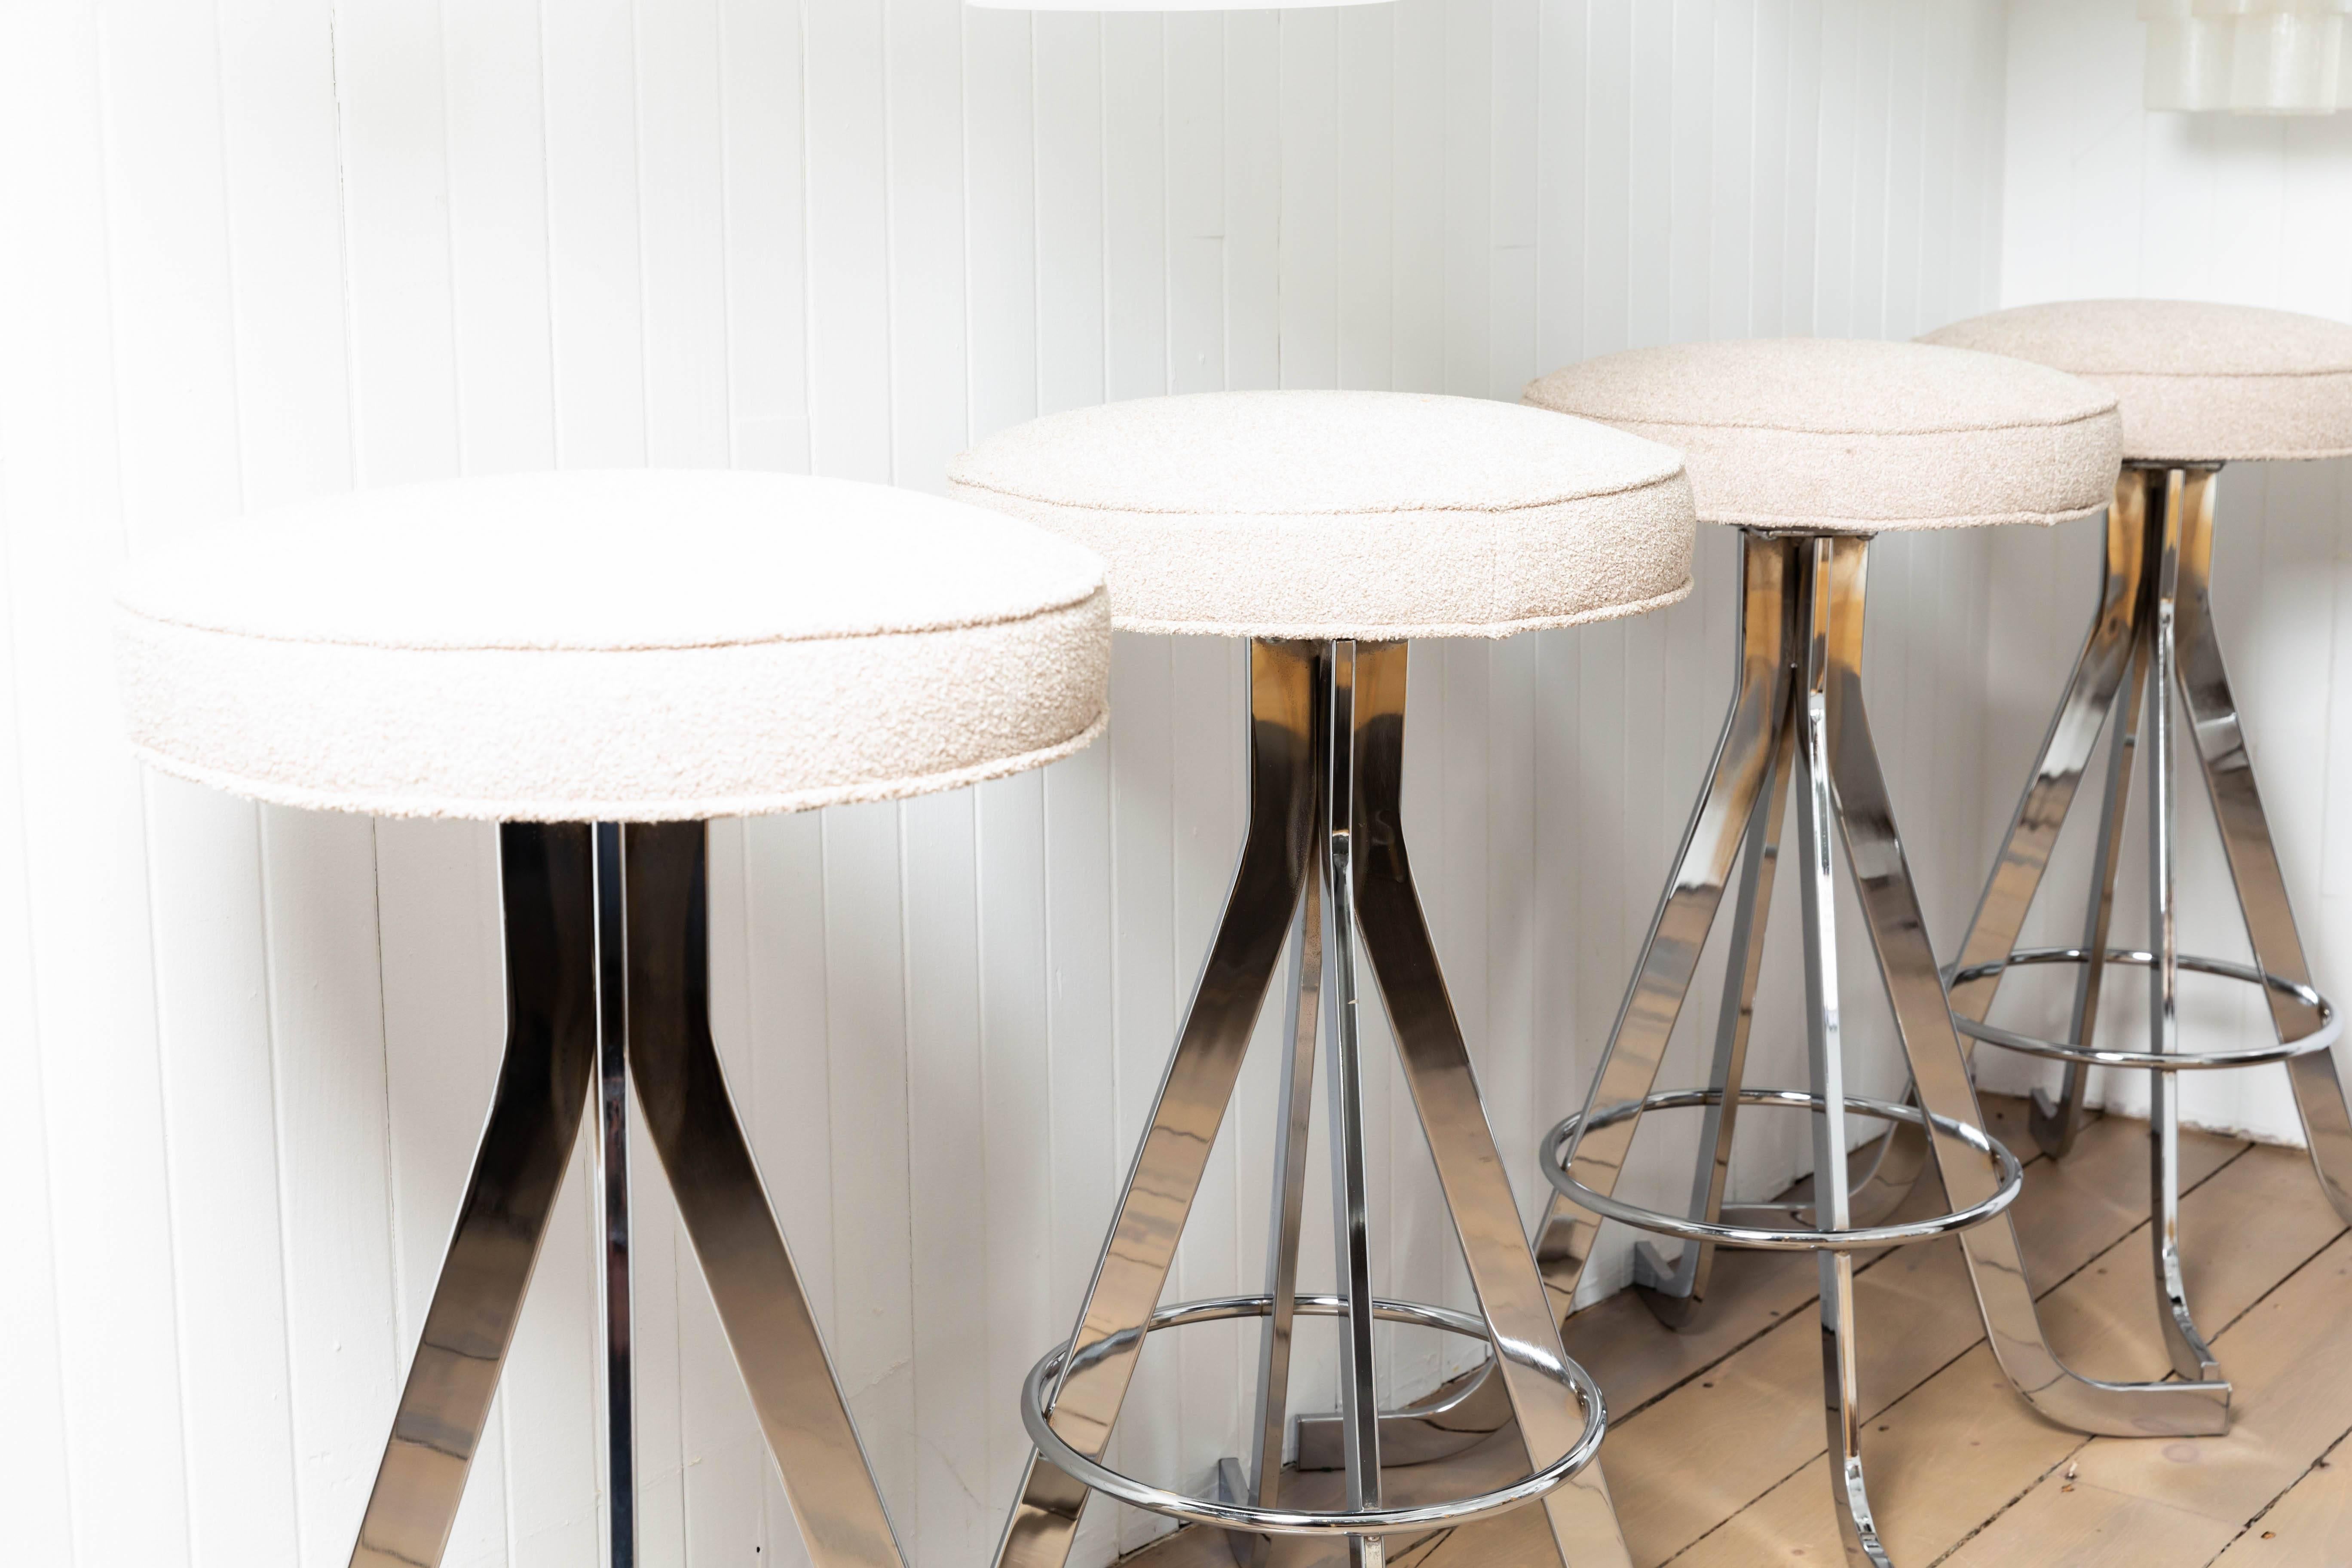 Set of four polished nickel stools with upholstered circular seats.